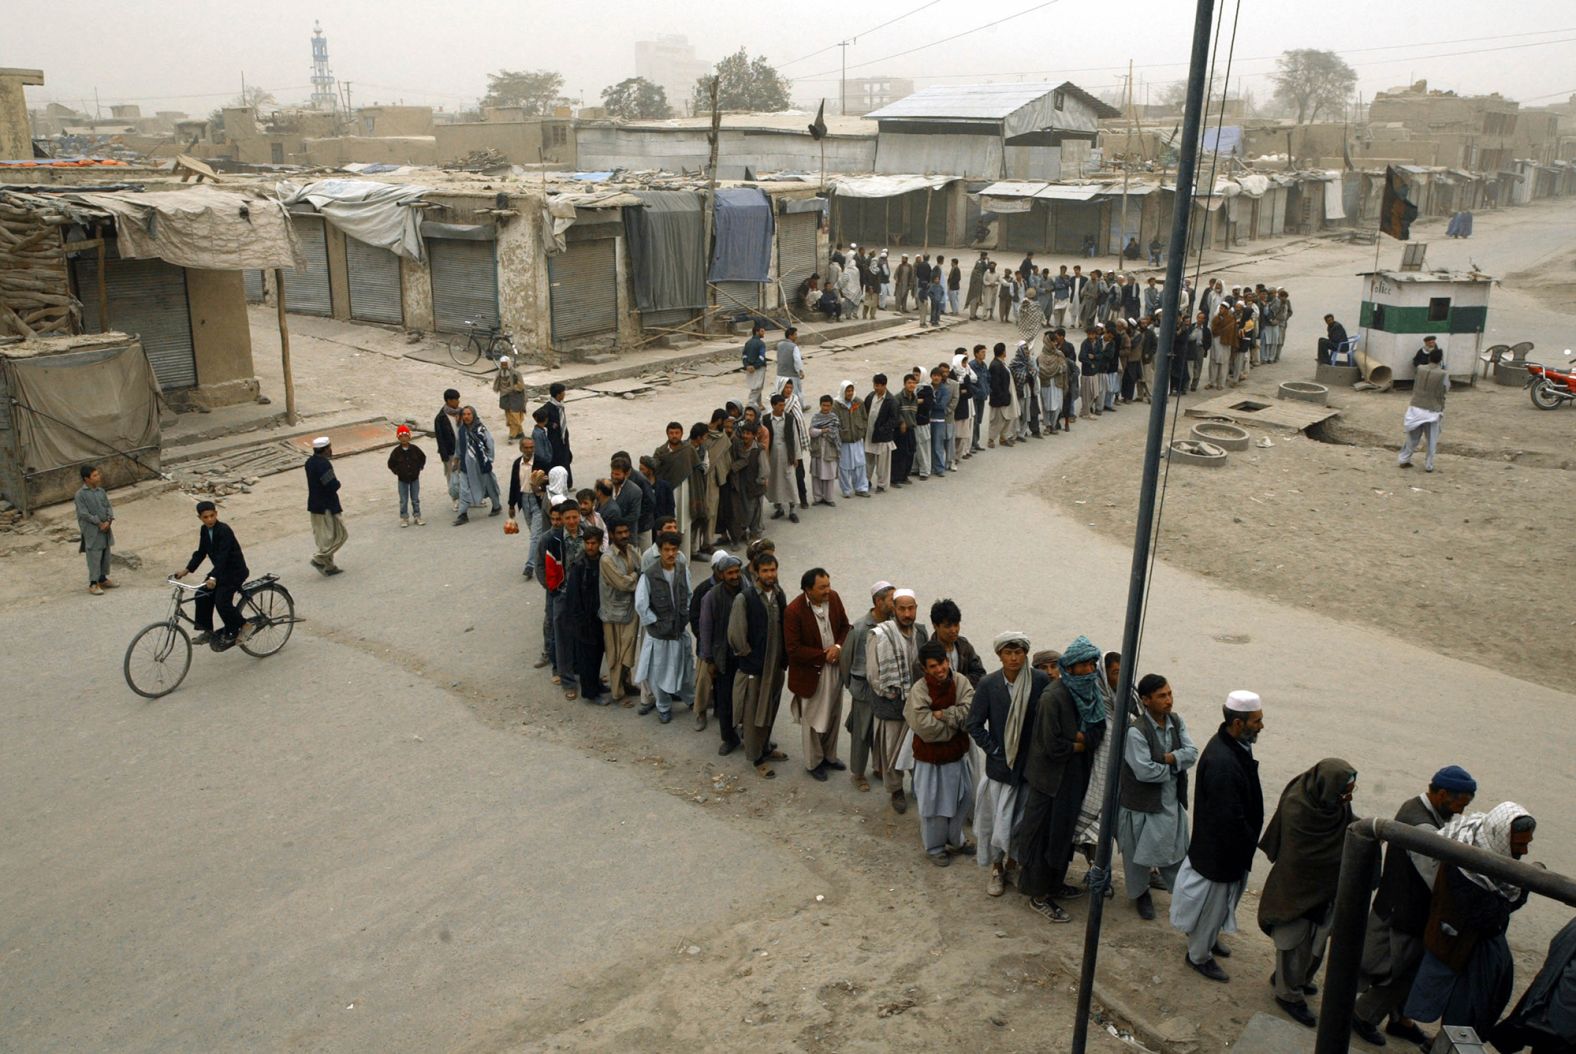 Afghans in Kabul line up to vote in the country's first democratic election in October 2004. Hamid Karzai was sworn in as President in December of that year.